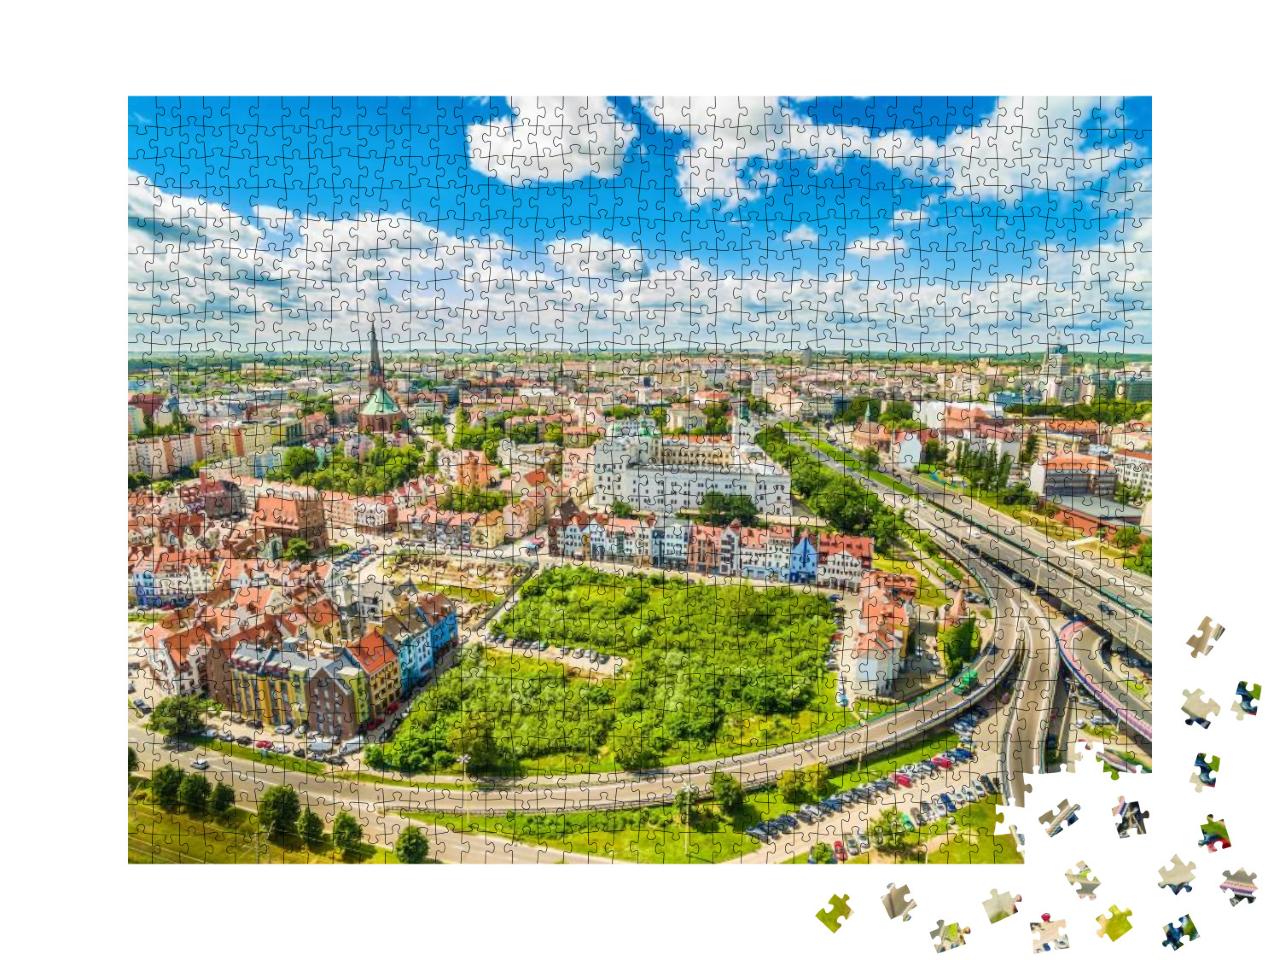 Szczecin - the Old Town from the Birds Eye View. Royal Ca... Jigsaw Puzzle with 1000 pieces